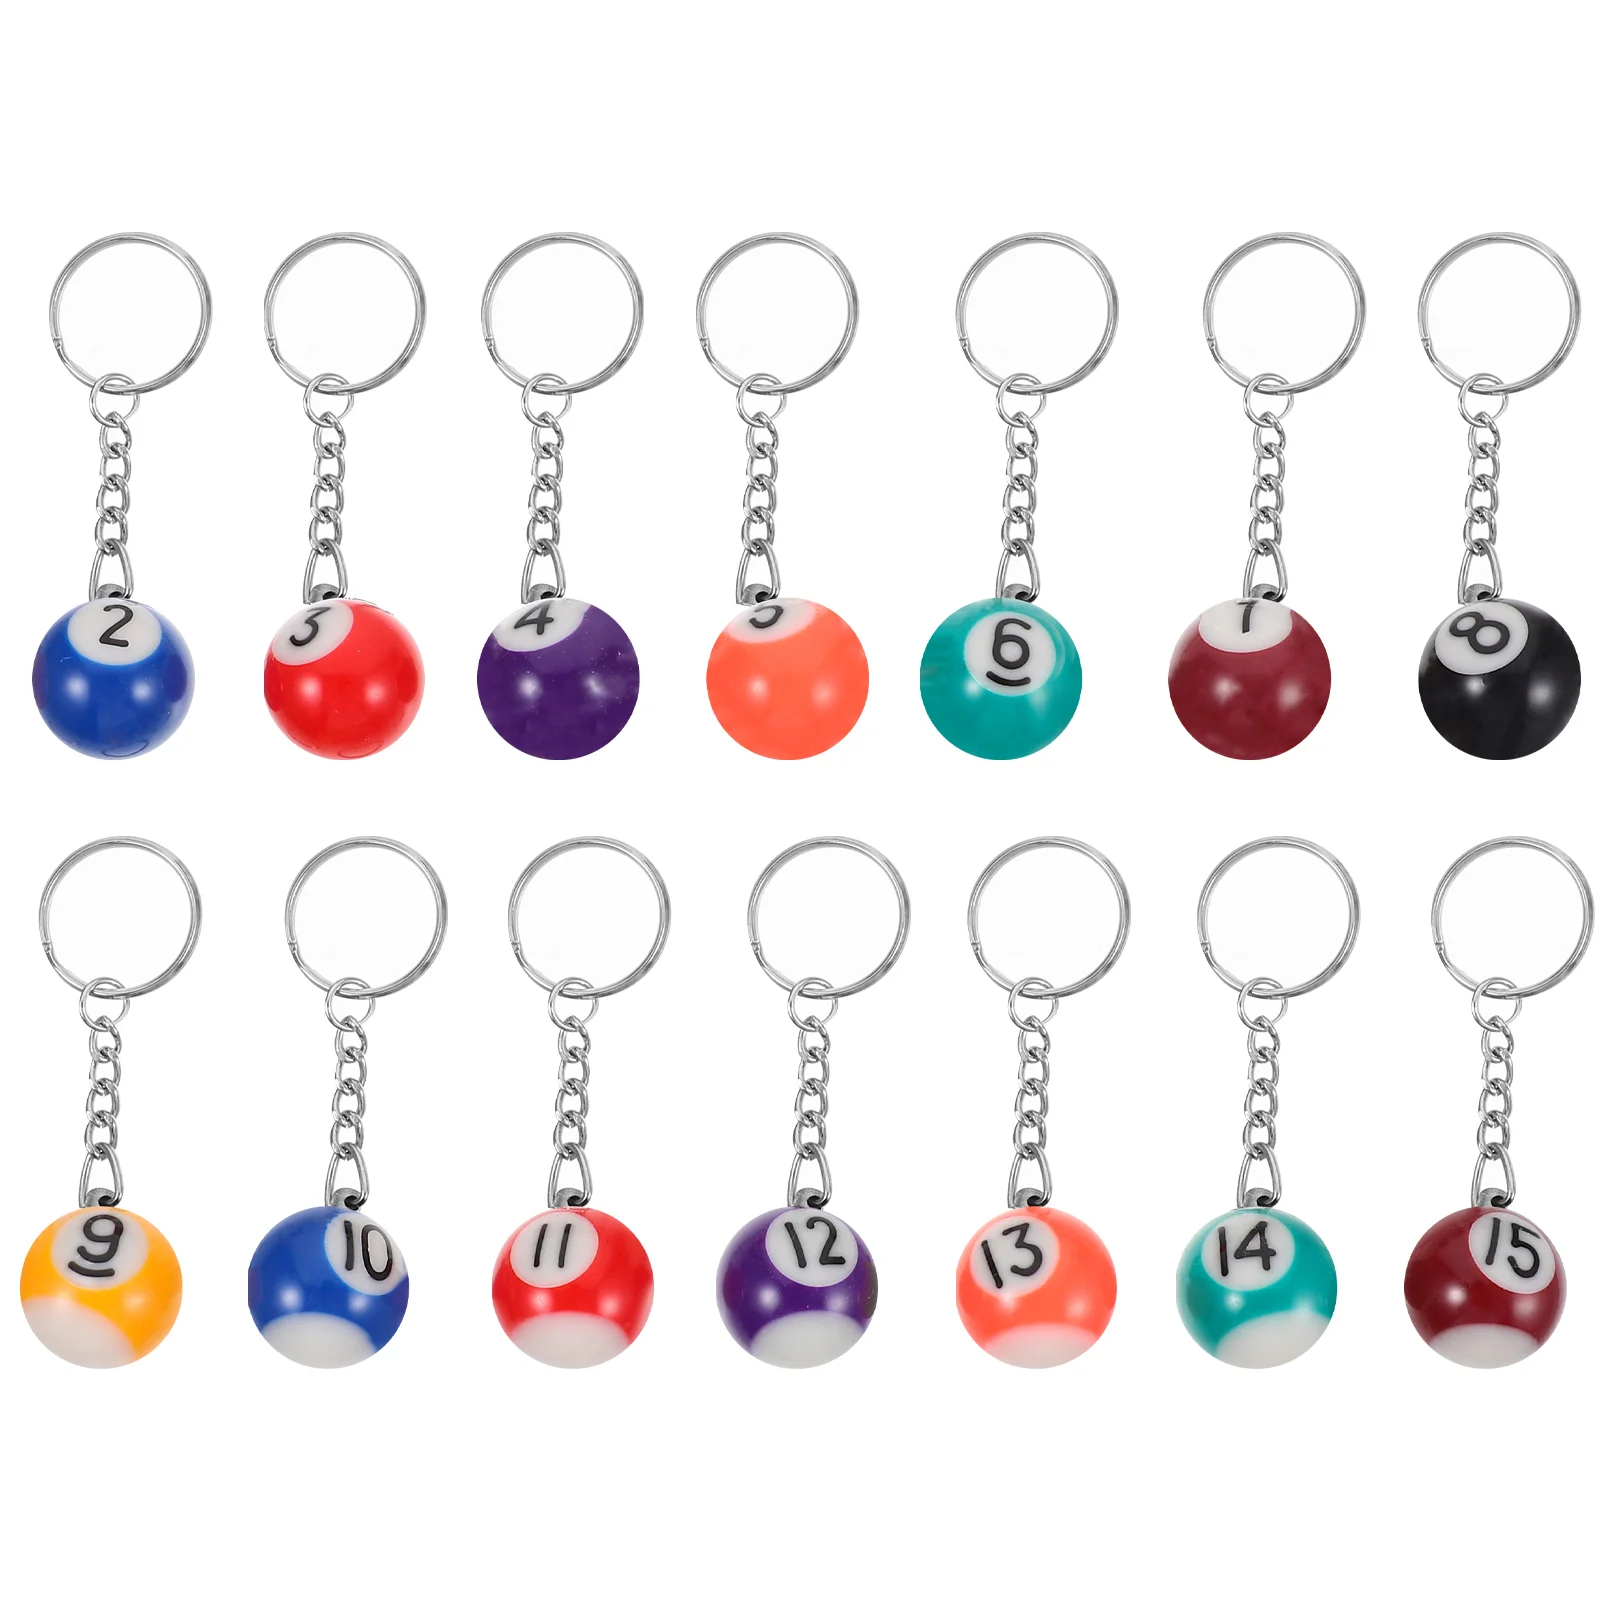 

16Pcs Ball Keyring Charms Billiards Ball Small Keychains Personalized Gifts Adorable Pool Ball Keychains Souvenir